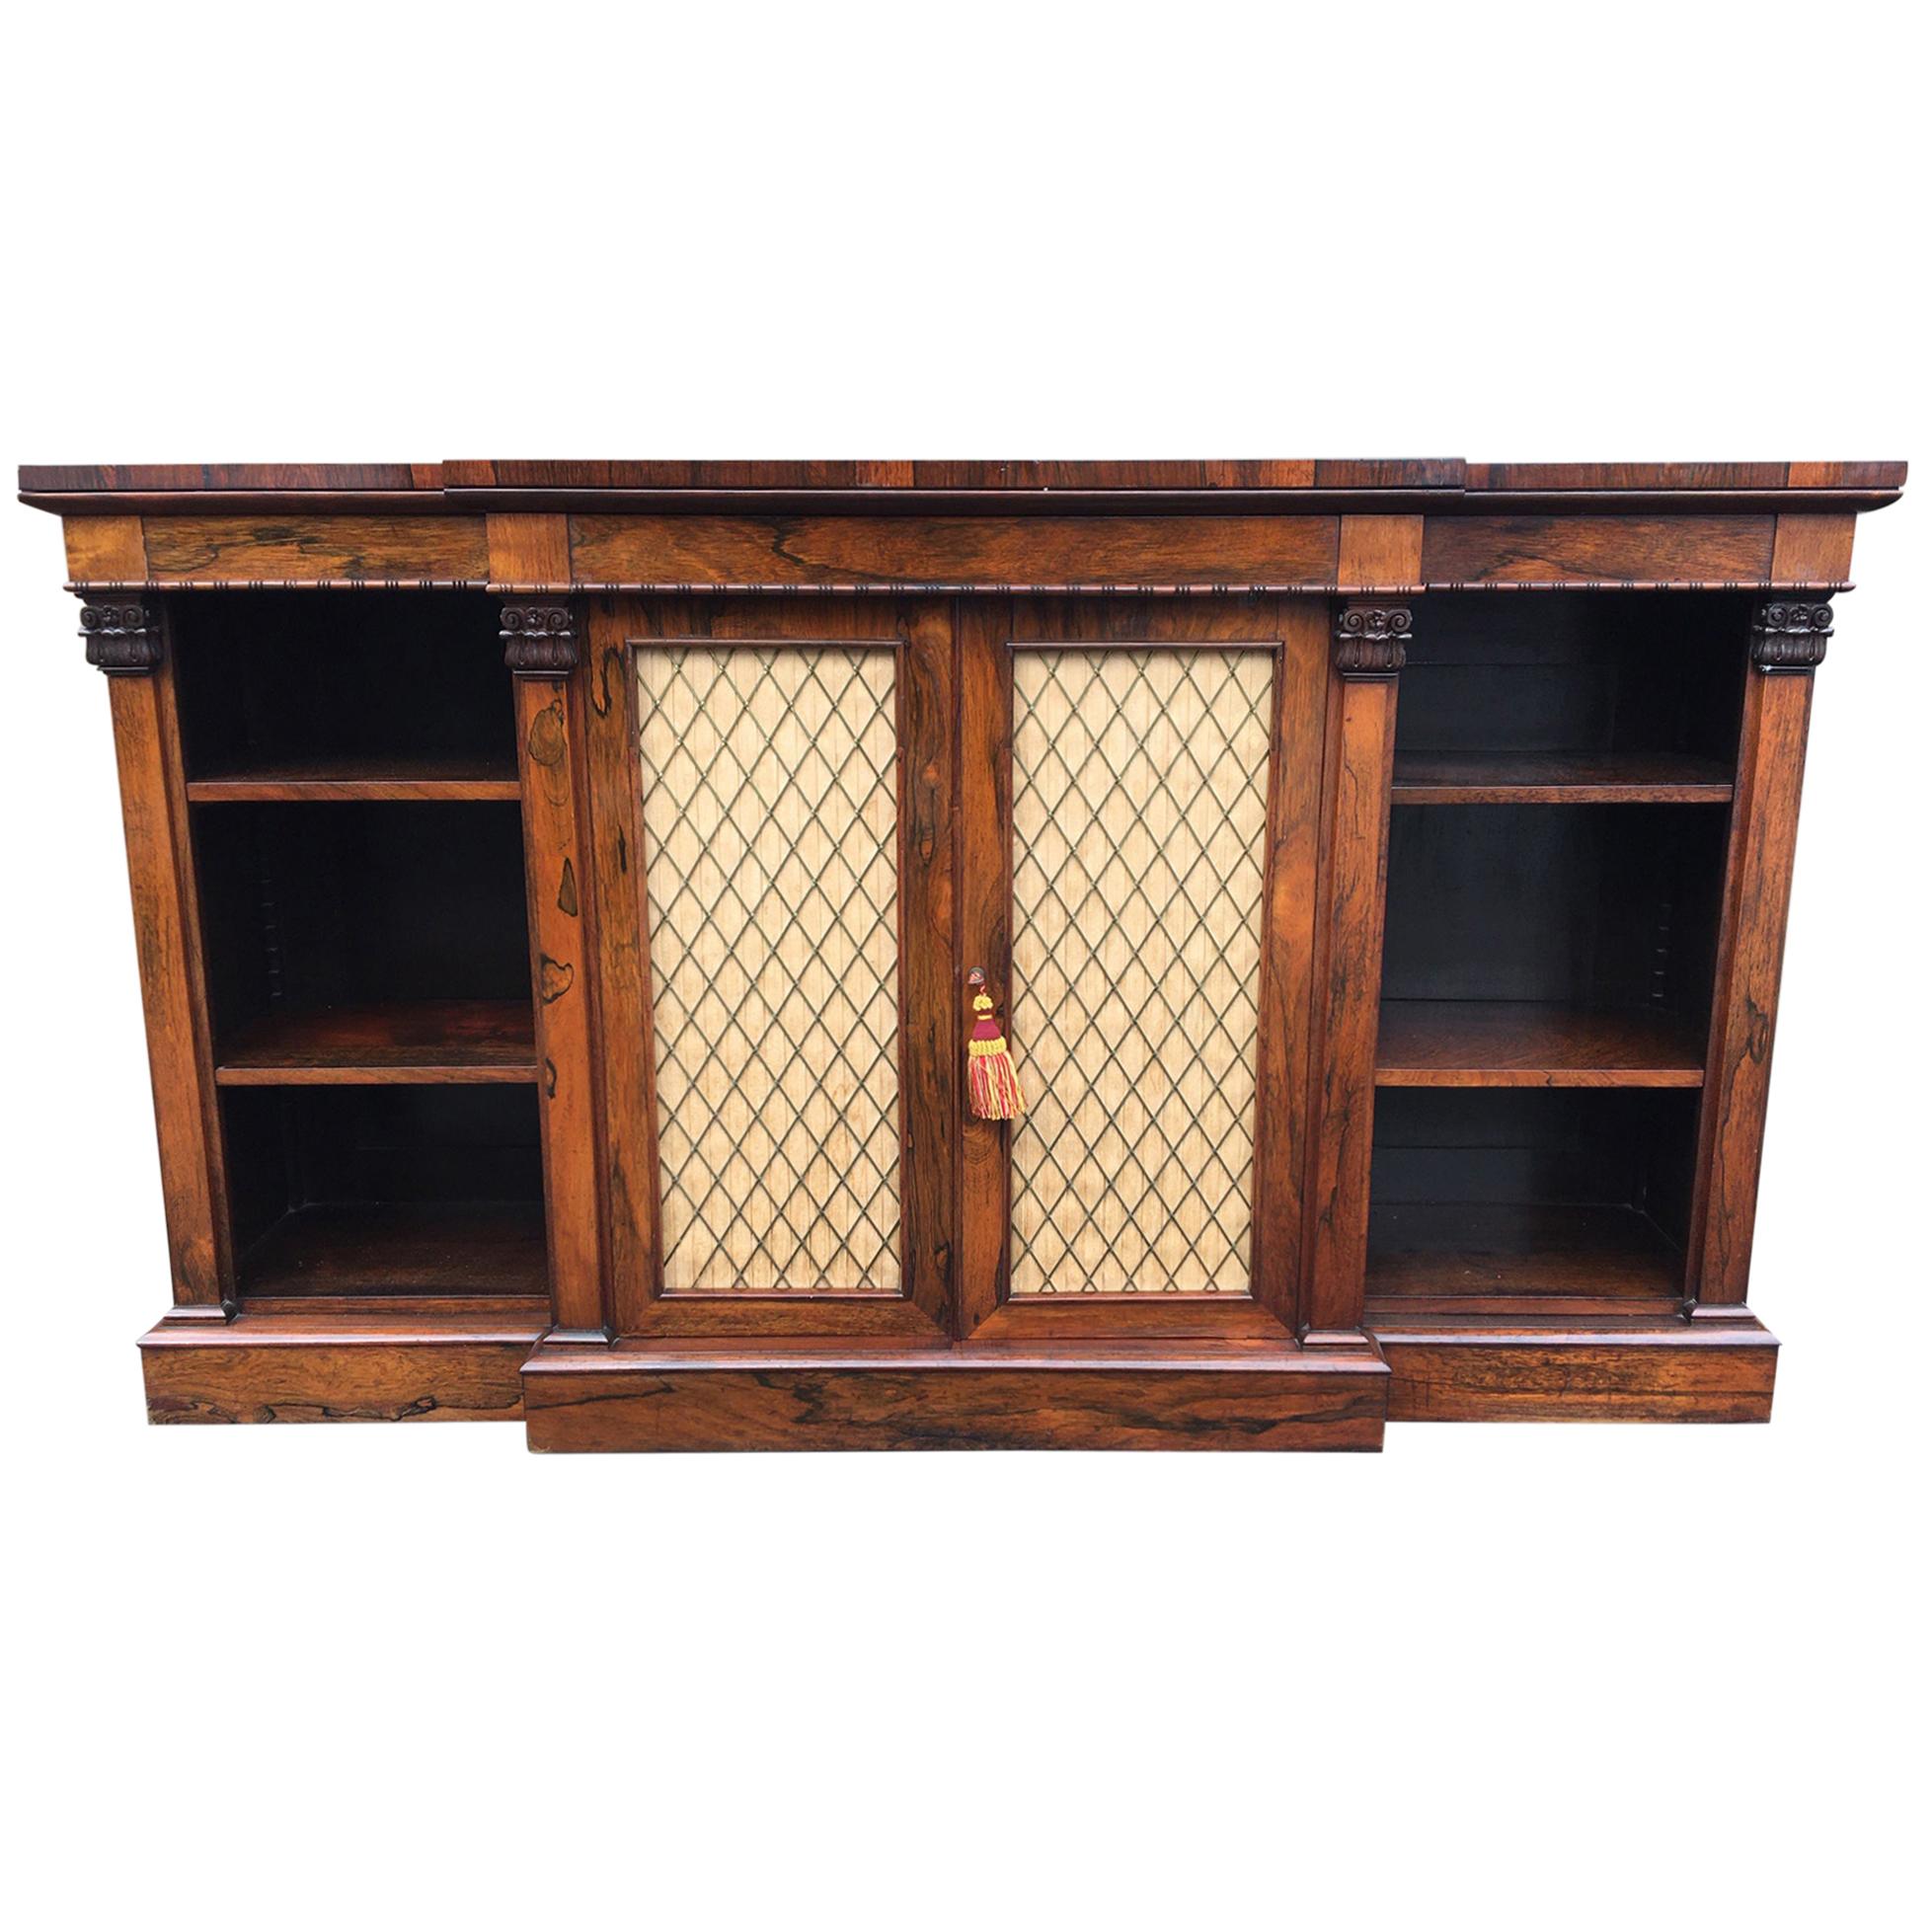 Bookcase Regency, English, Rosewood, Early 19th Century